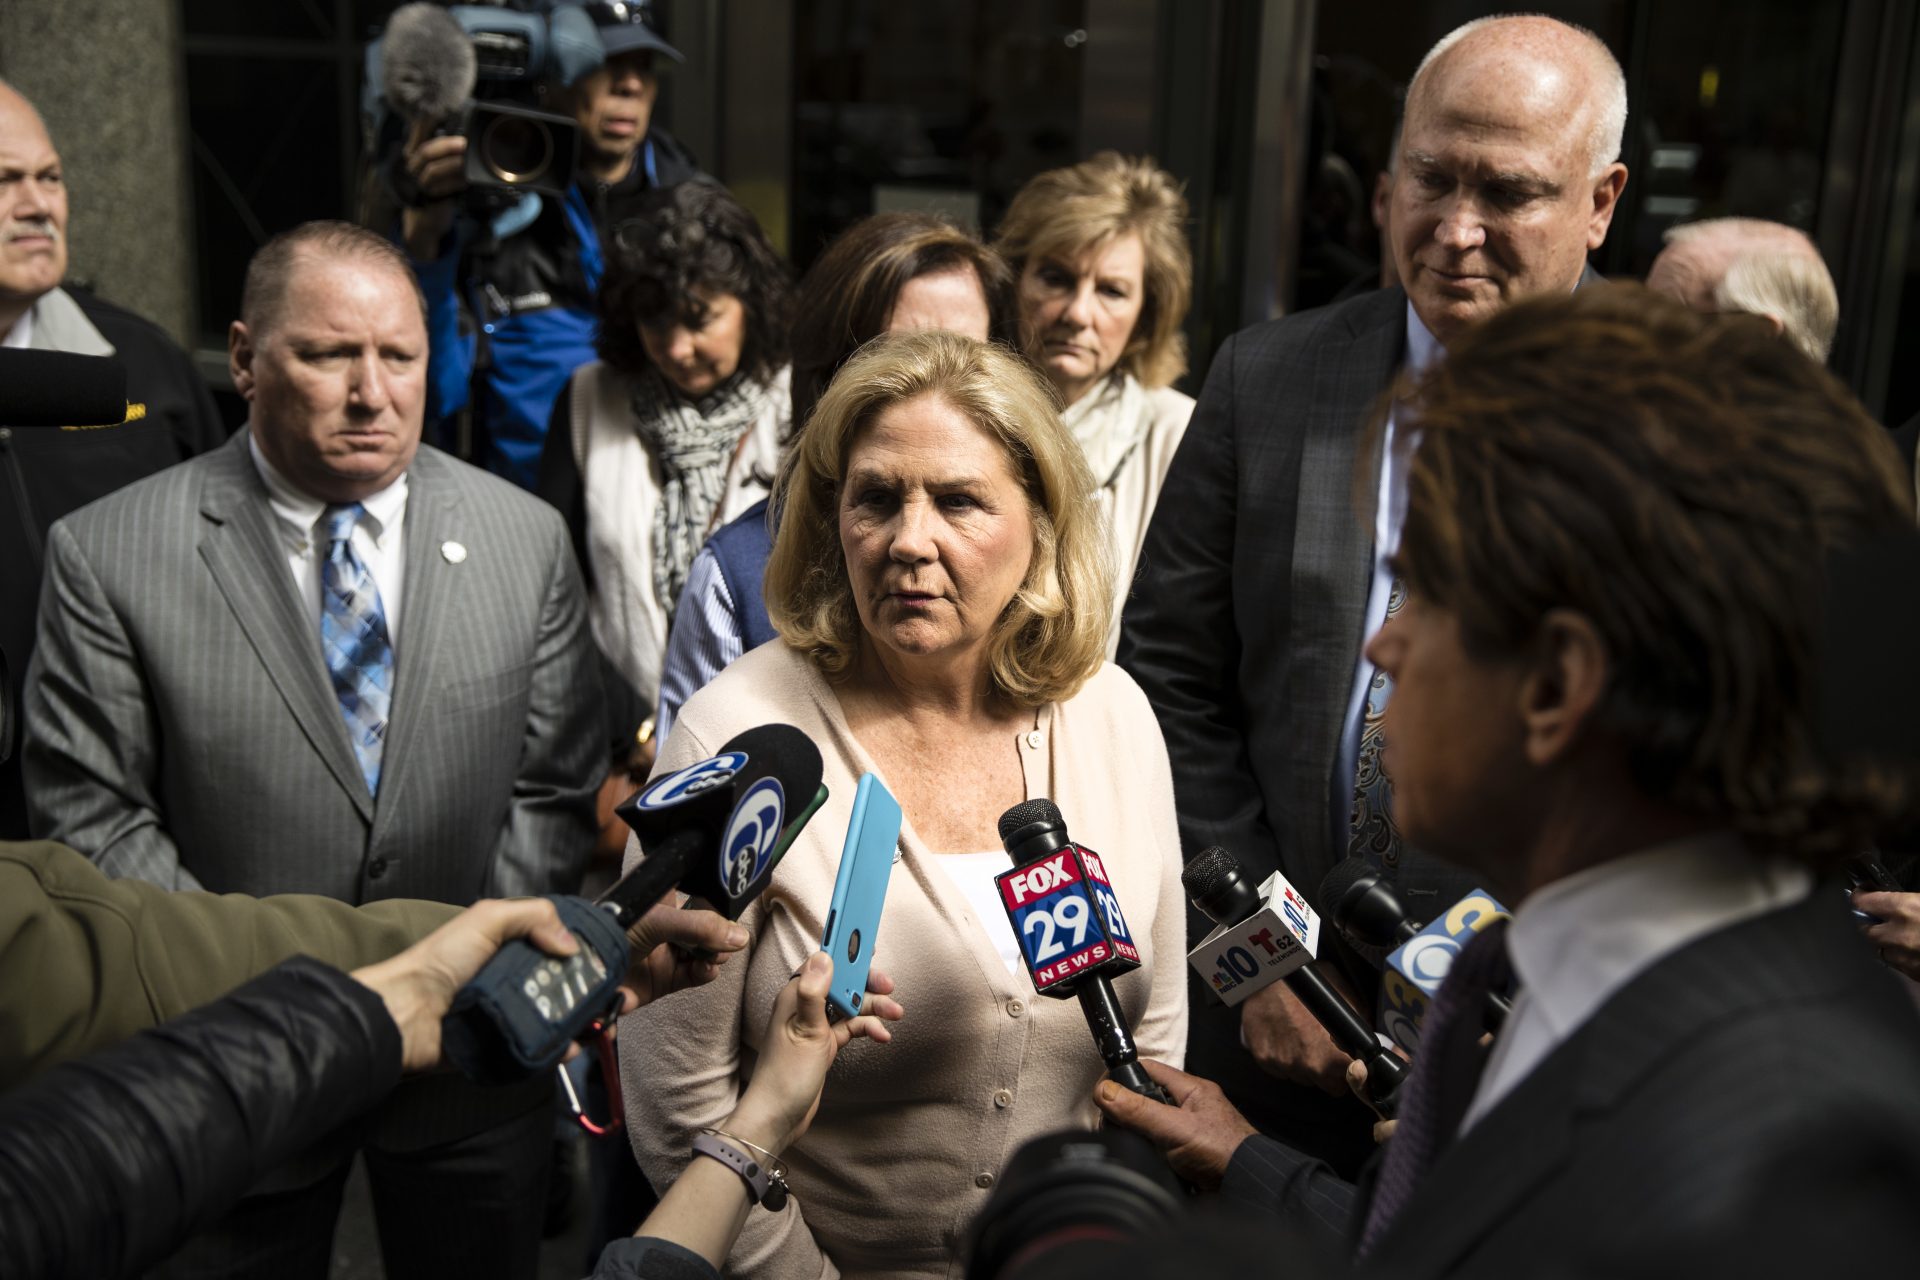 In this April 30, 2018 file photo Maureen Faulkner, the widow of slain Philadelphia police officer Daniel Faulkner, speaks with members of the media after a hearing for Mumia Abu-Jamal, convicted in the 1981 murder of her husband, in Philadelphia.